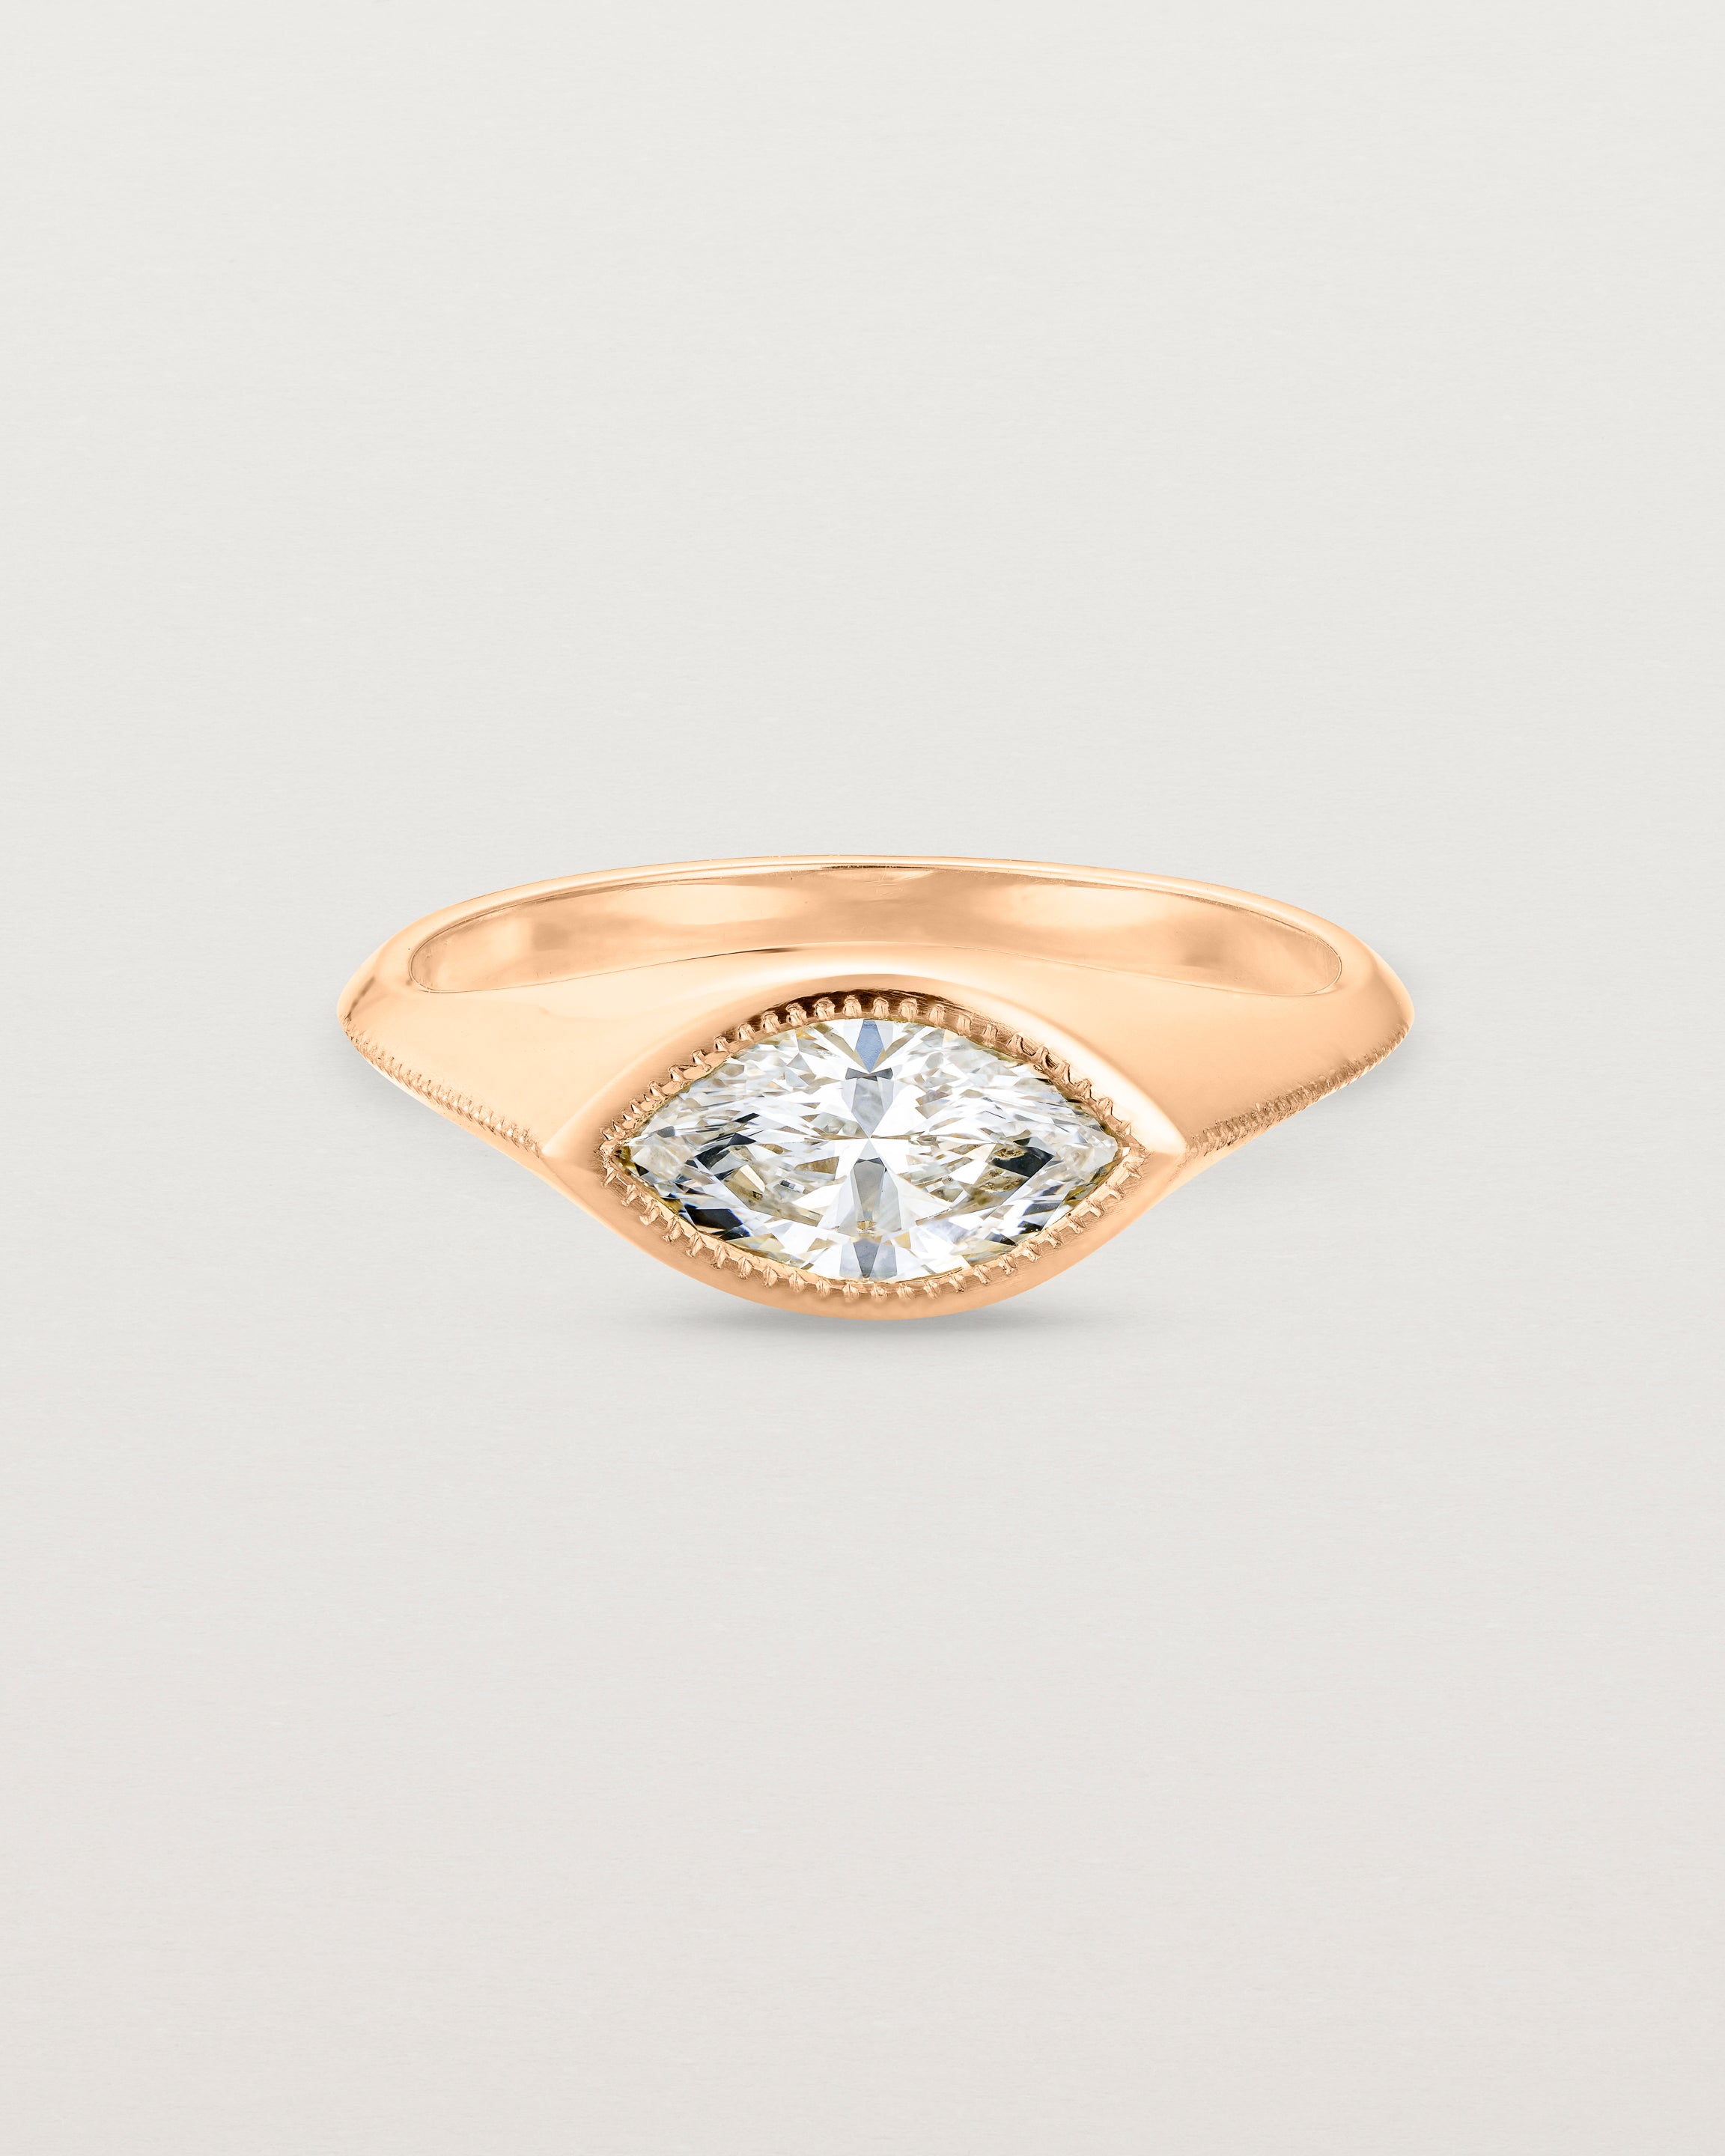 Front view of the Átlas Marquise Signet | Laboratory Grown Diamond in rose gold, in a polished finish. _label:Polished Finish Example